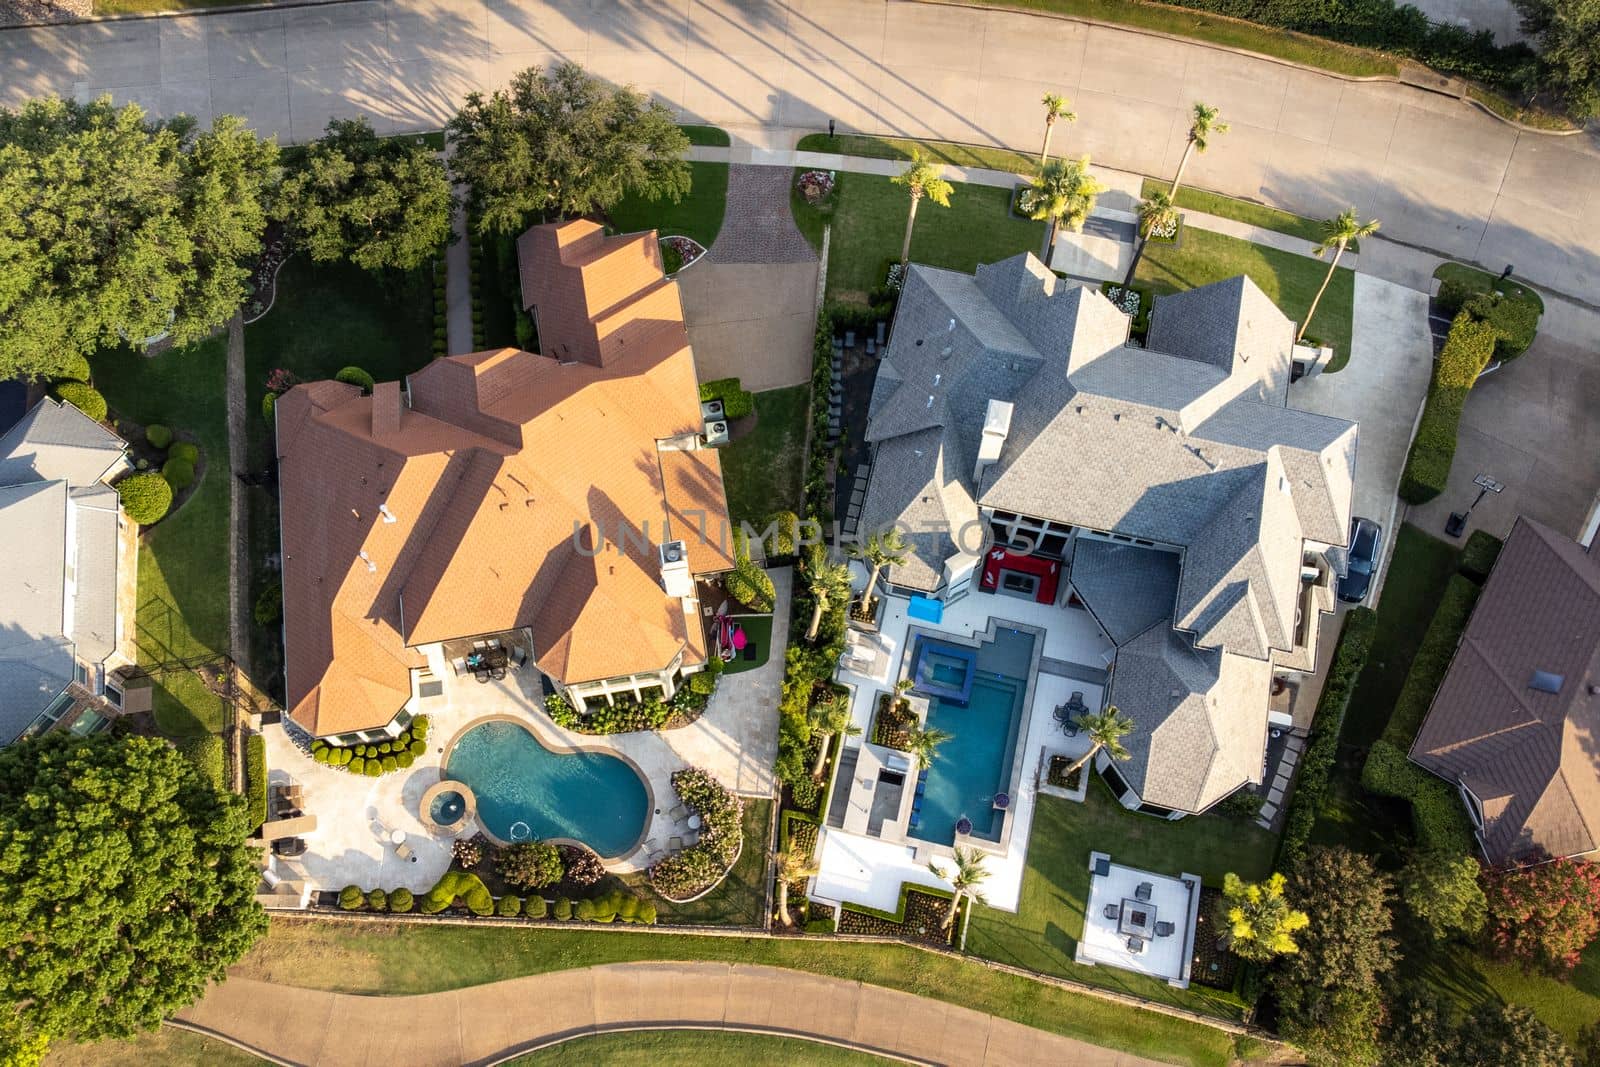 Aerial view of mansions with swimming pools surrounded by green grass and trees in the summertime. by Khosro1